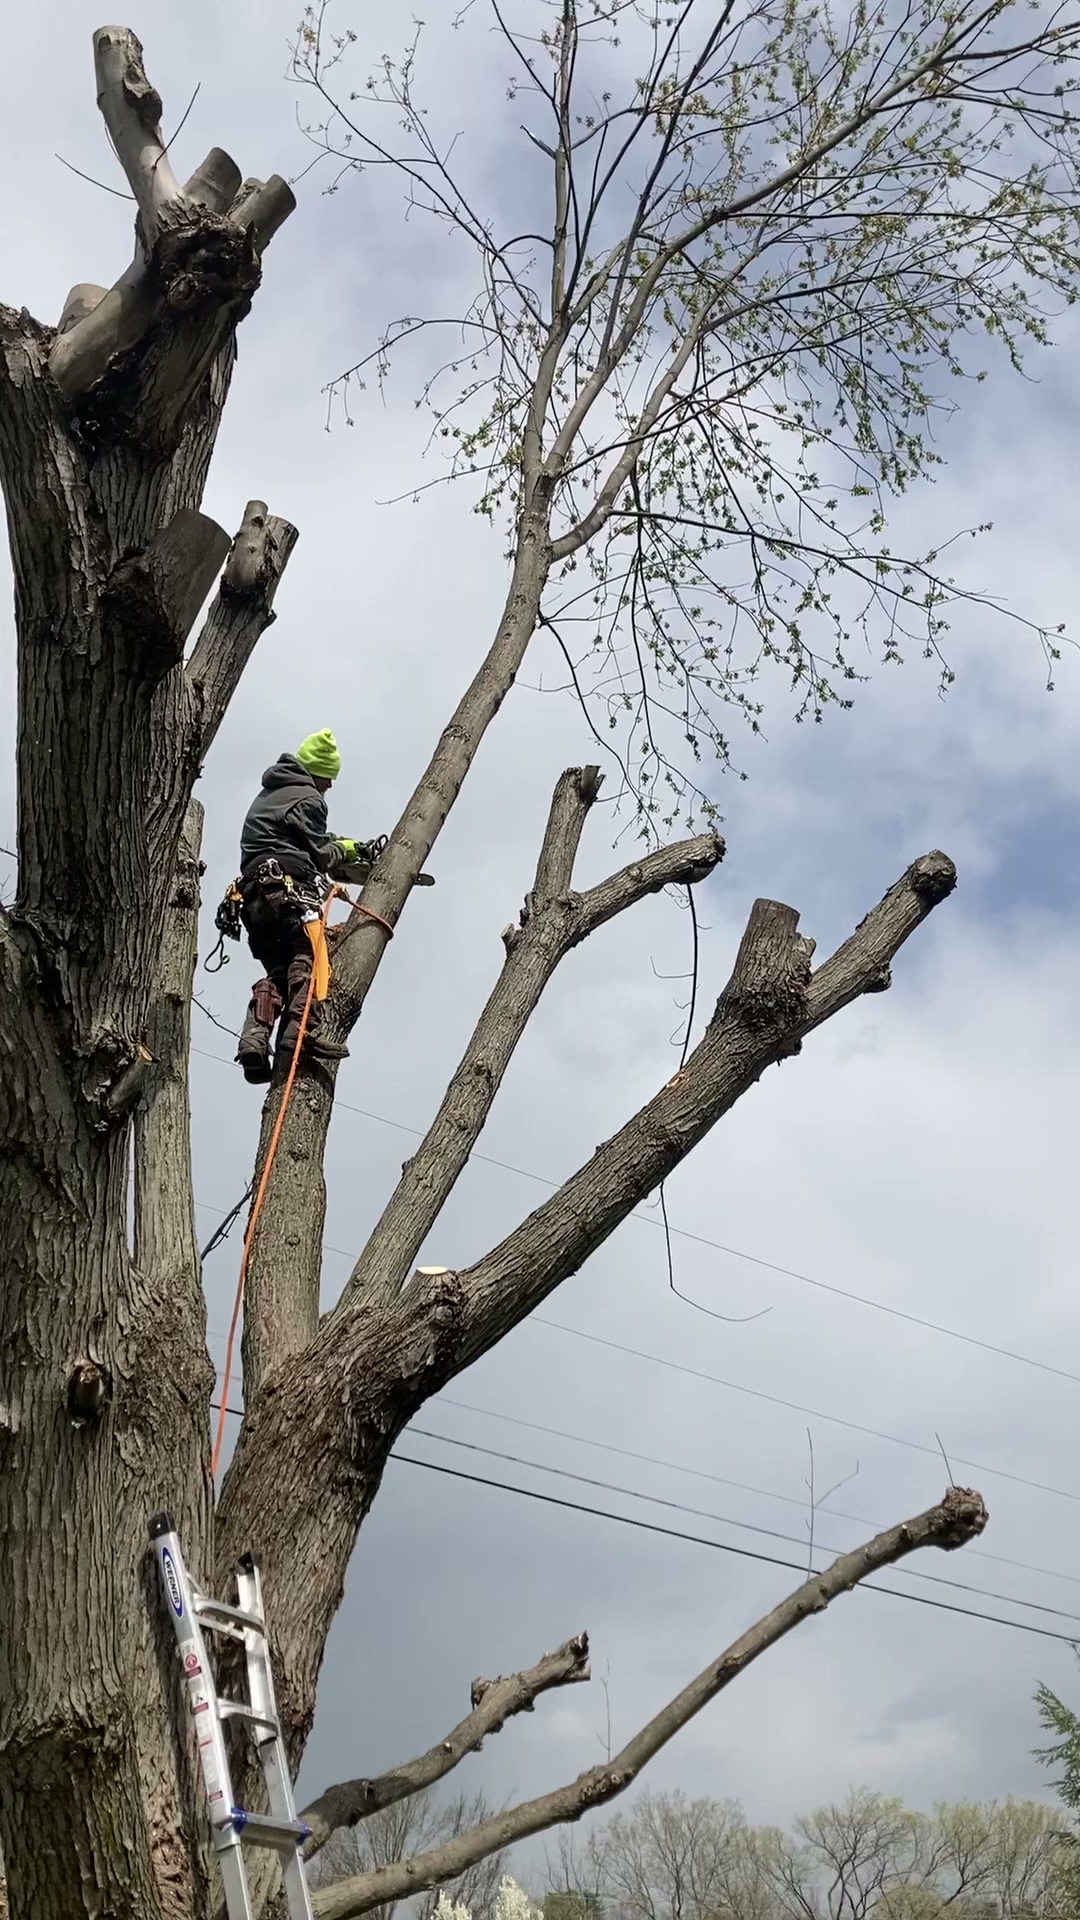 Red Squirrel Tree Services, LLC